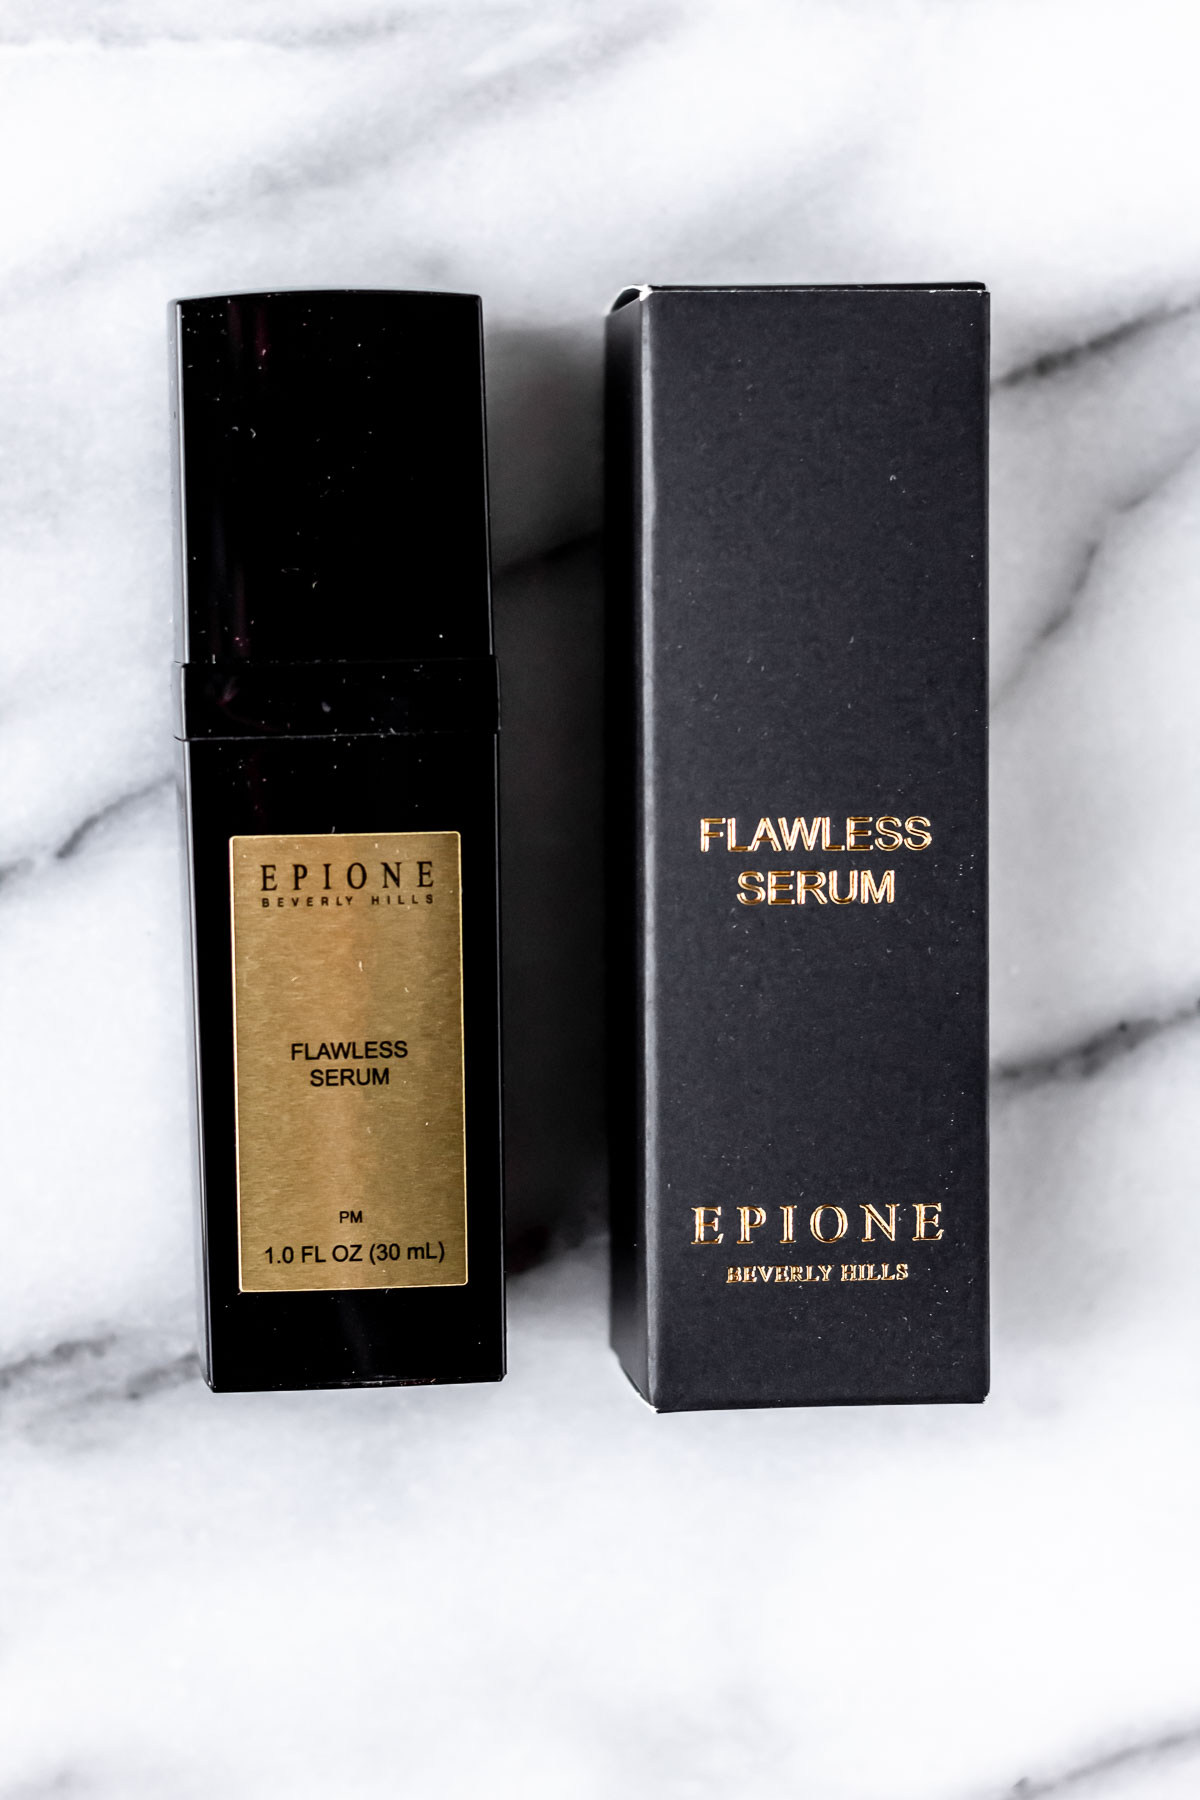 Epione Flawless Serum bottle and box on a marble background.